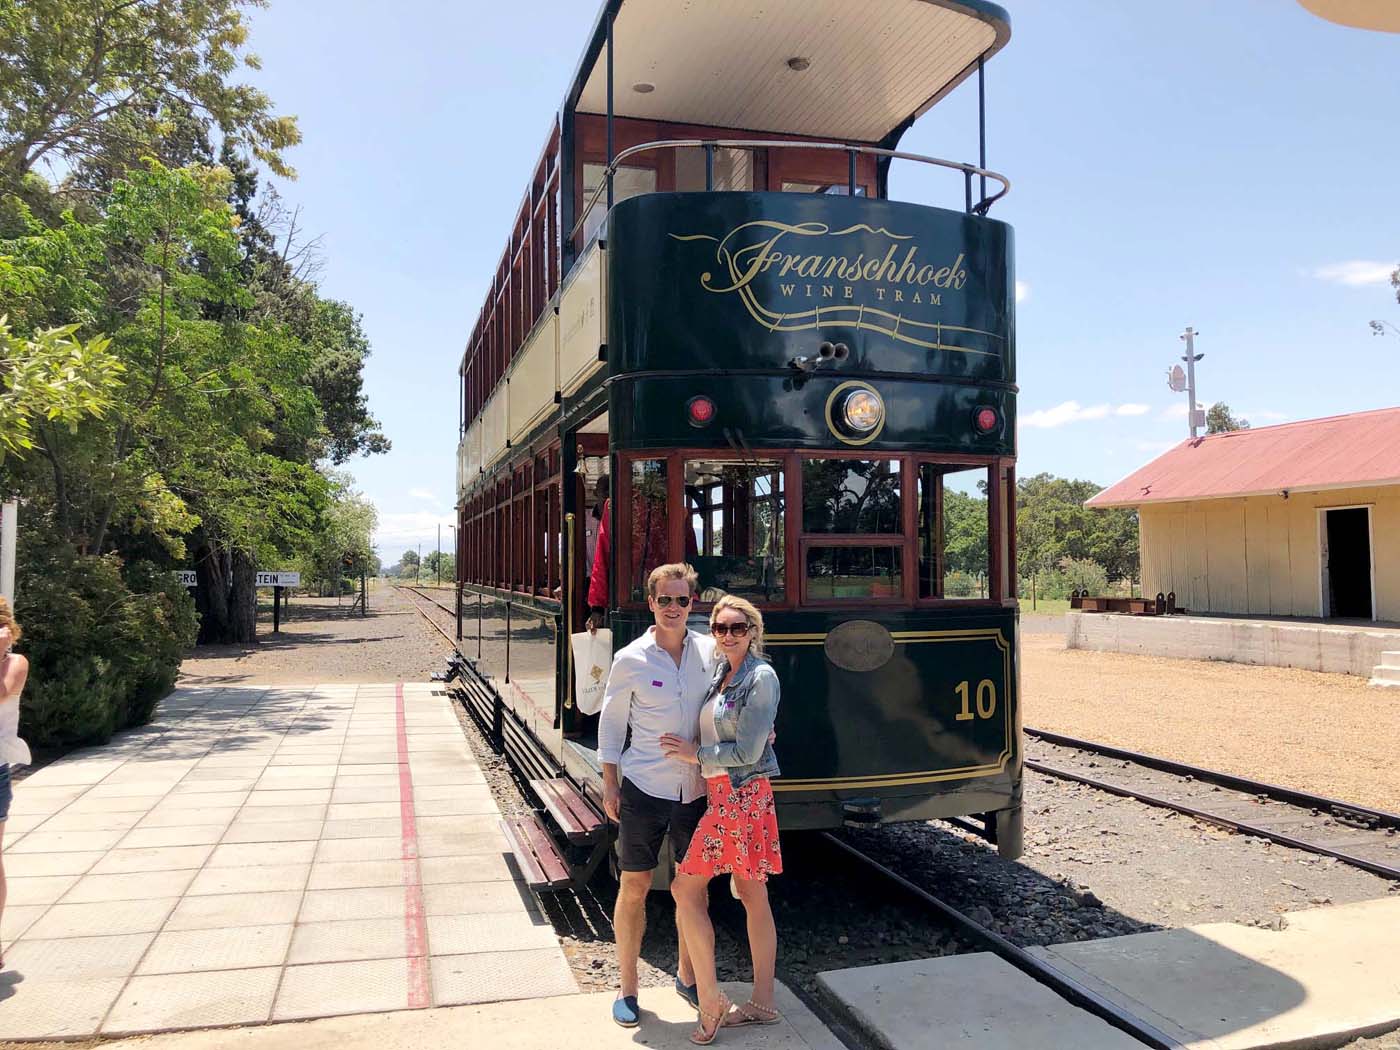 The Franschhoek Wine Tram, South Africa